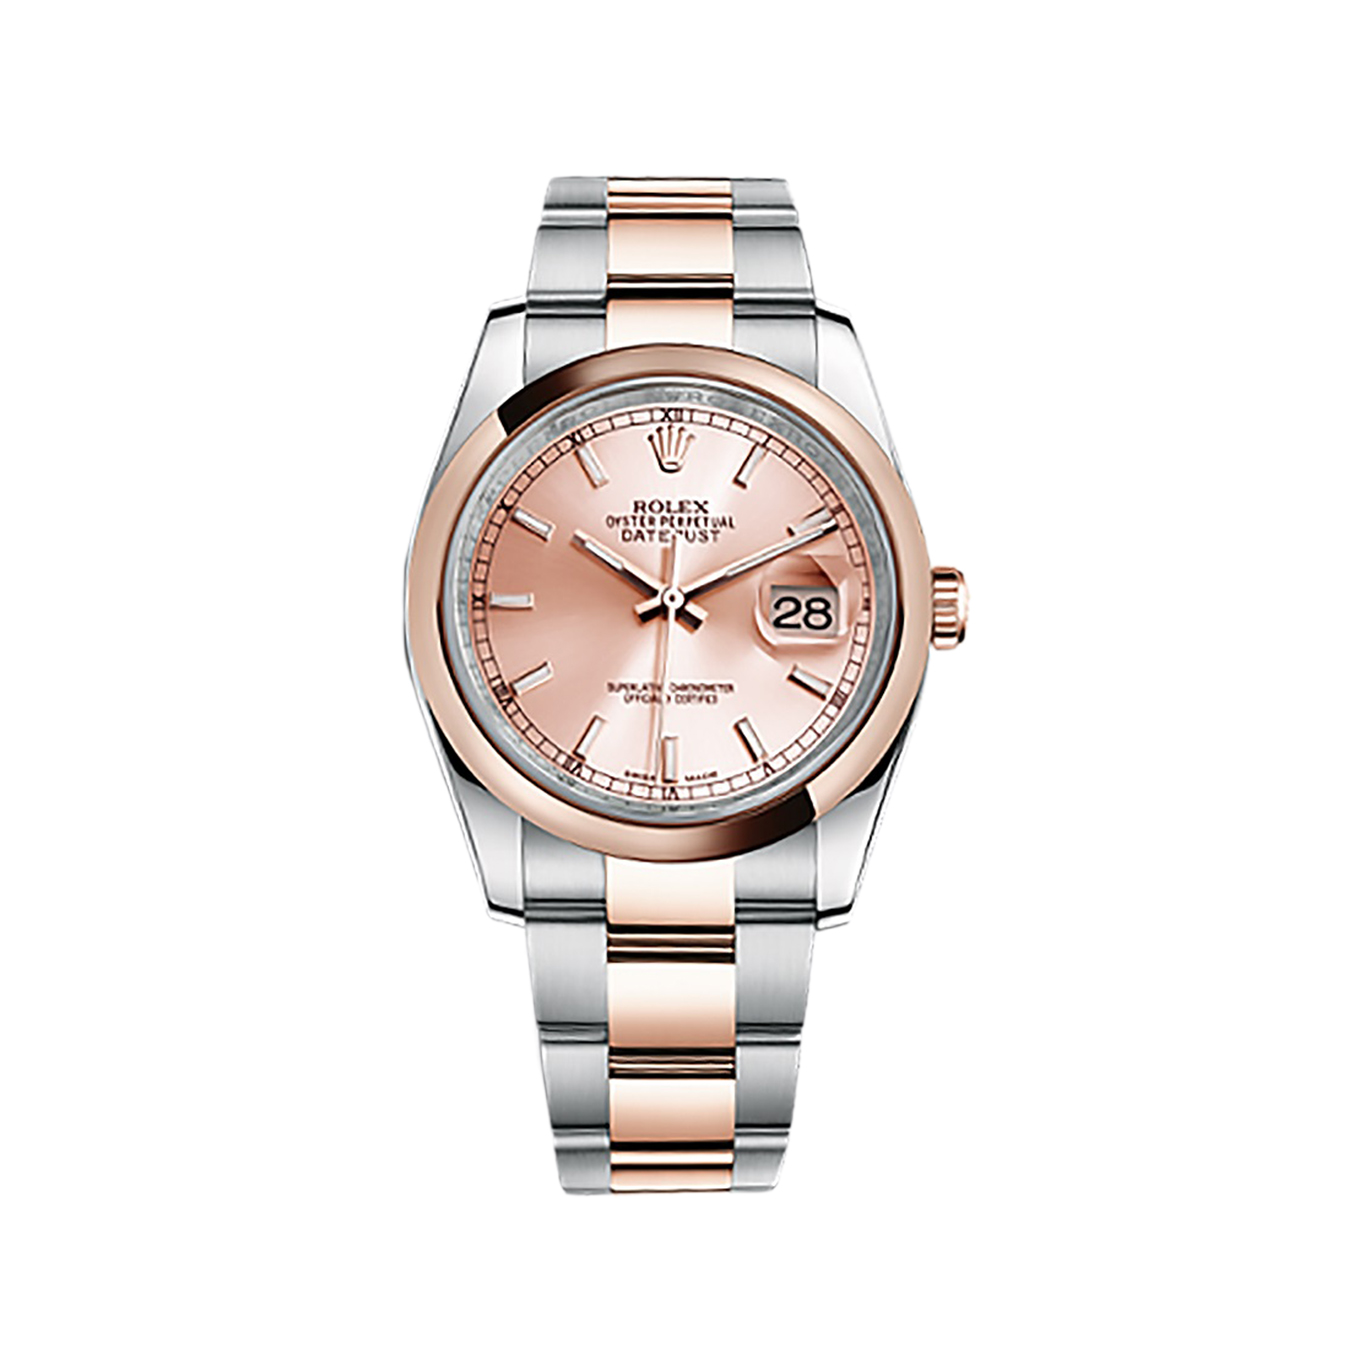 Datejust 36 116201 Rose Gold & Stainless Steel Watch (Pink)